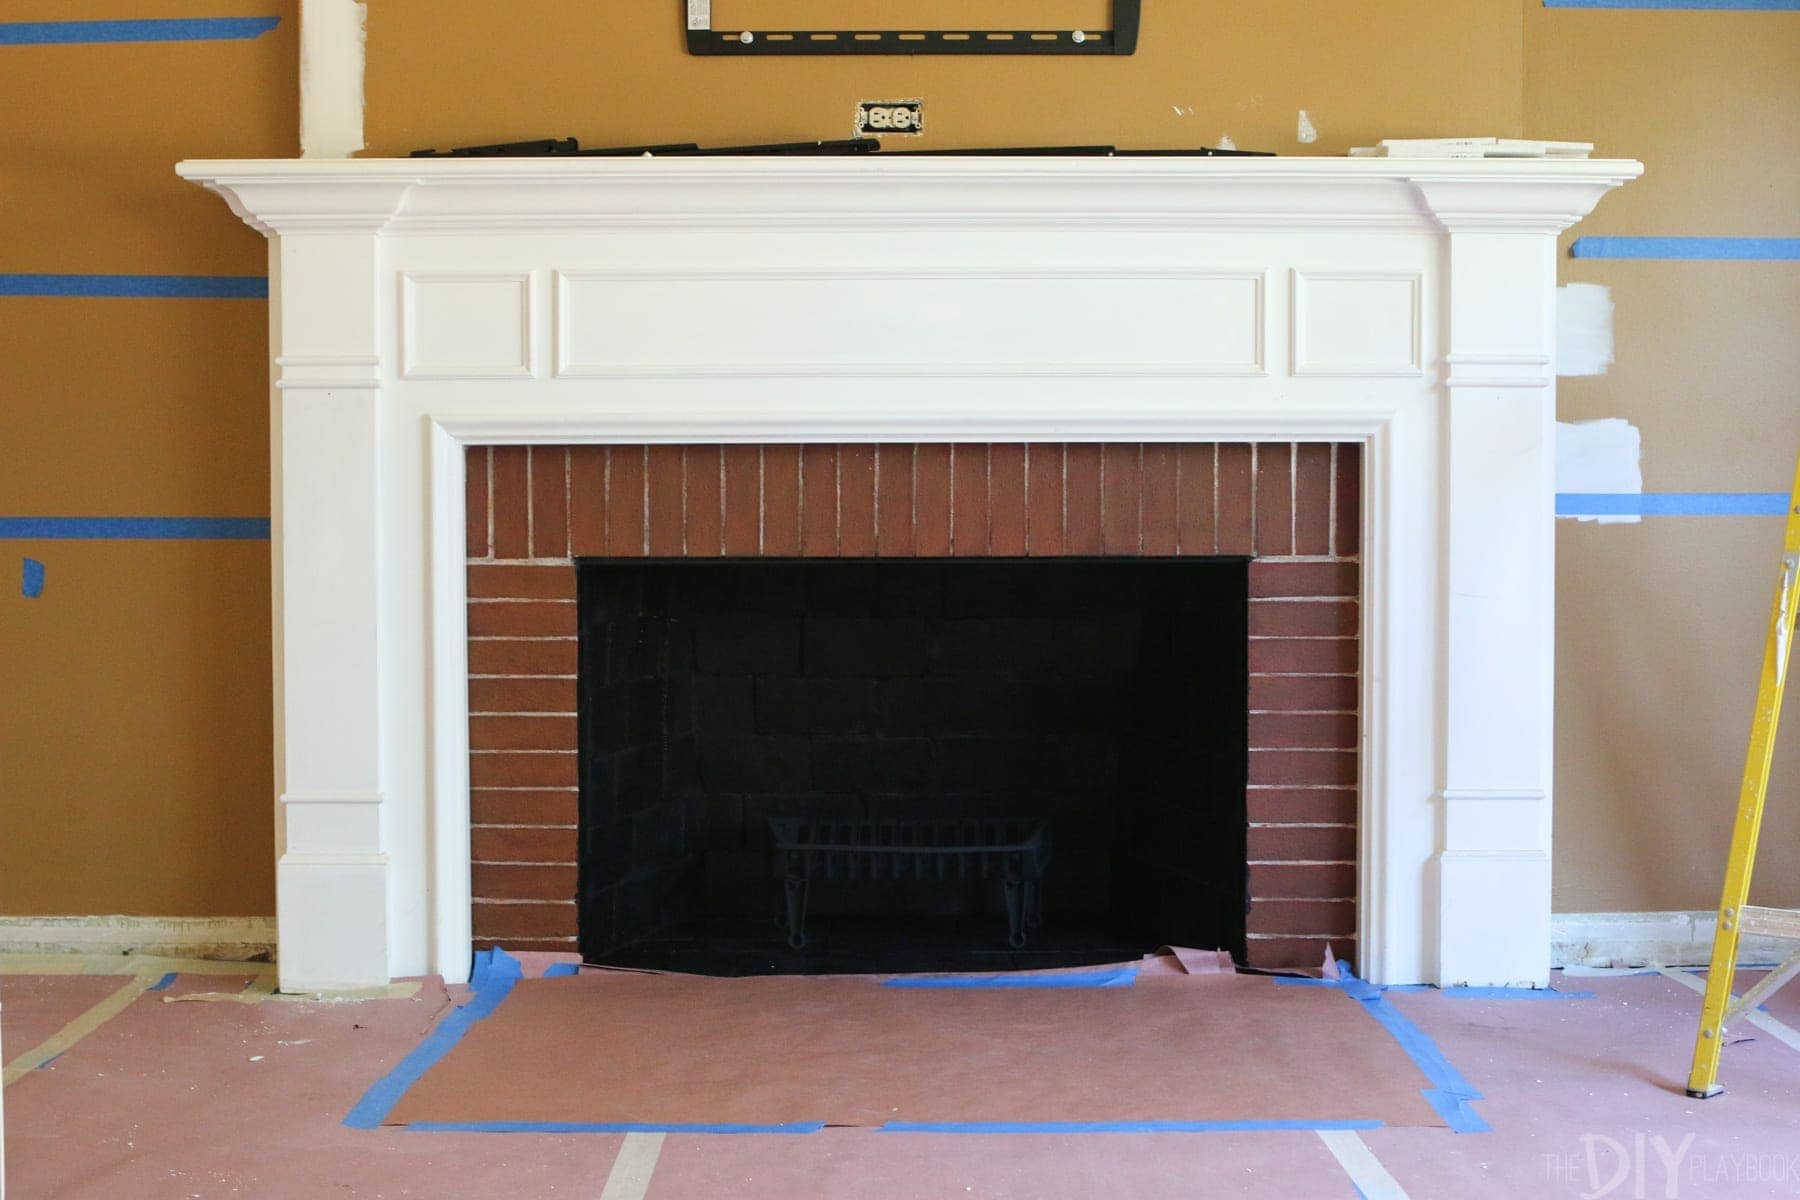 spray painting the inside of a white fireplace